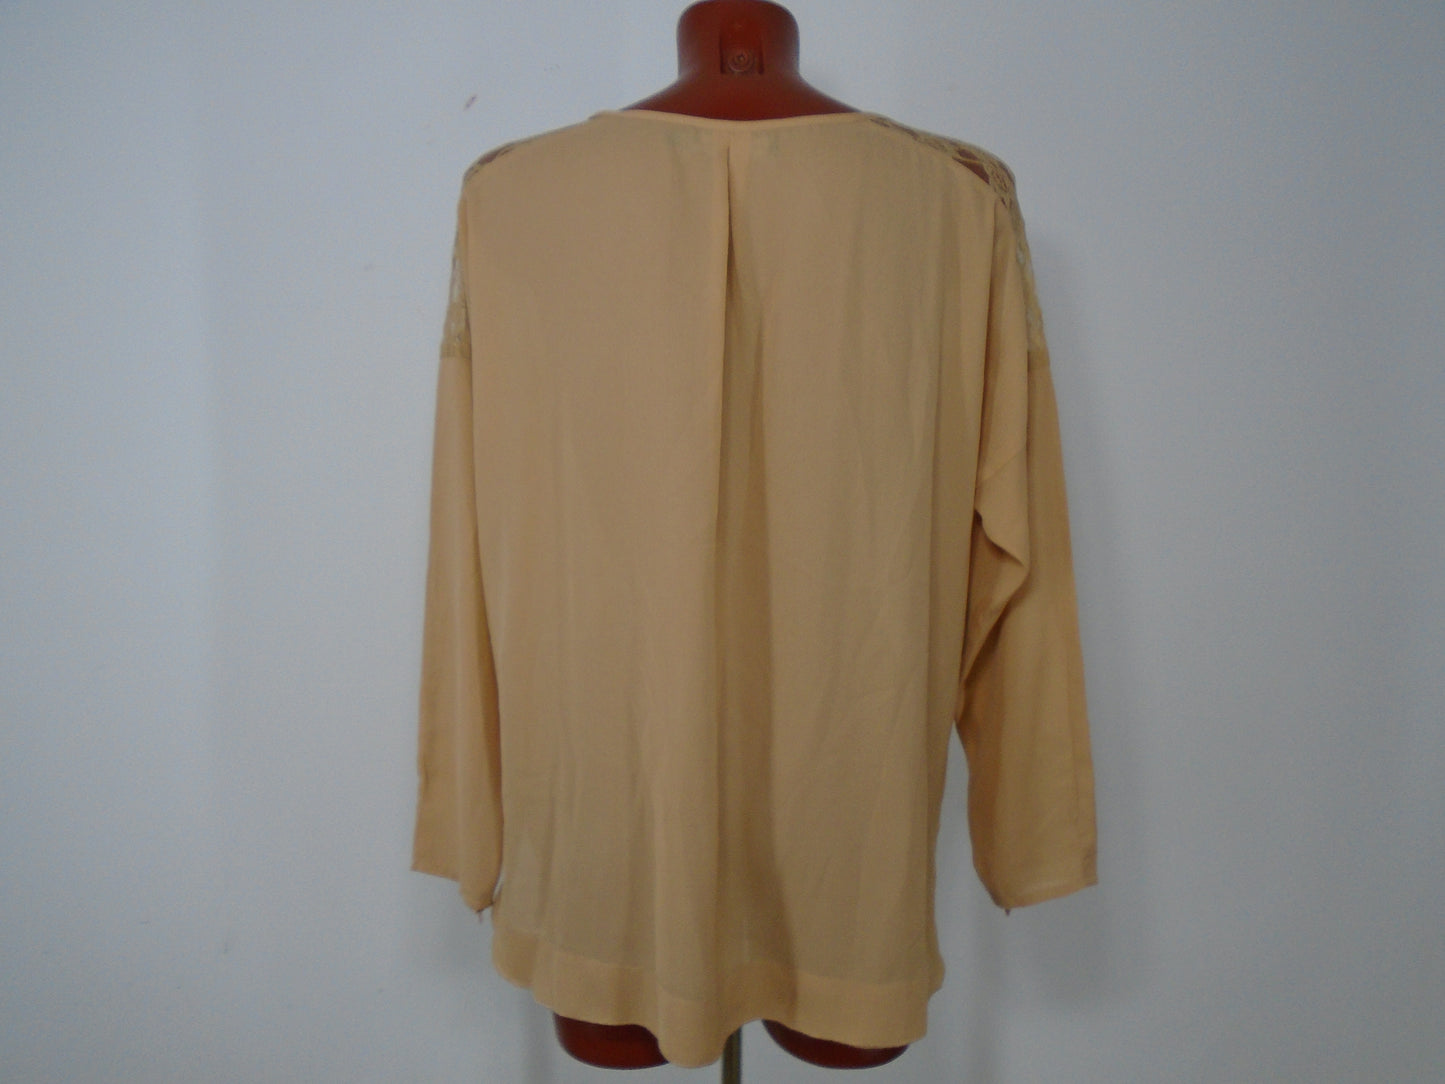 Women's Blouse Urban Outfitters. Beige. XL. Used. Very good condition